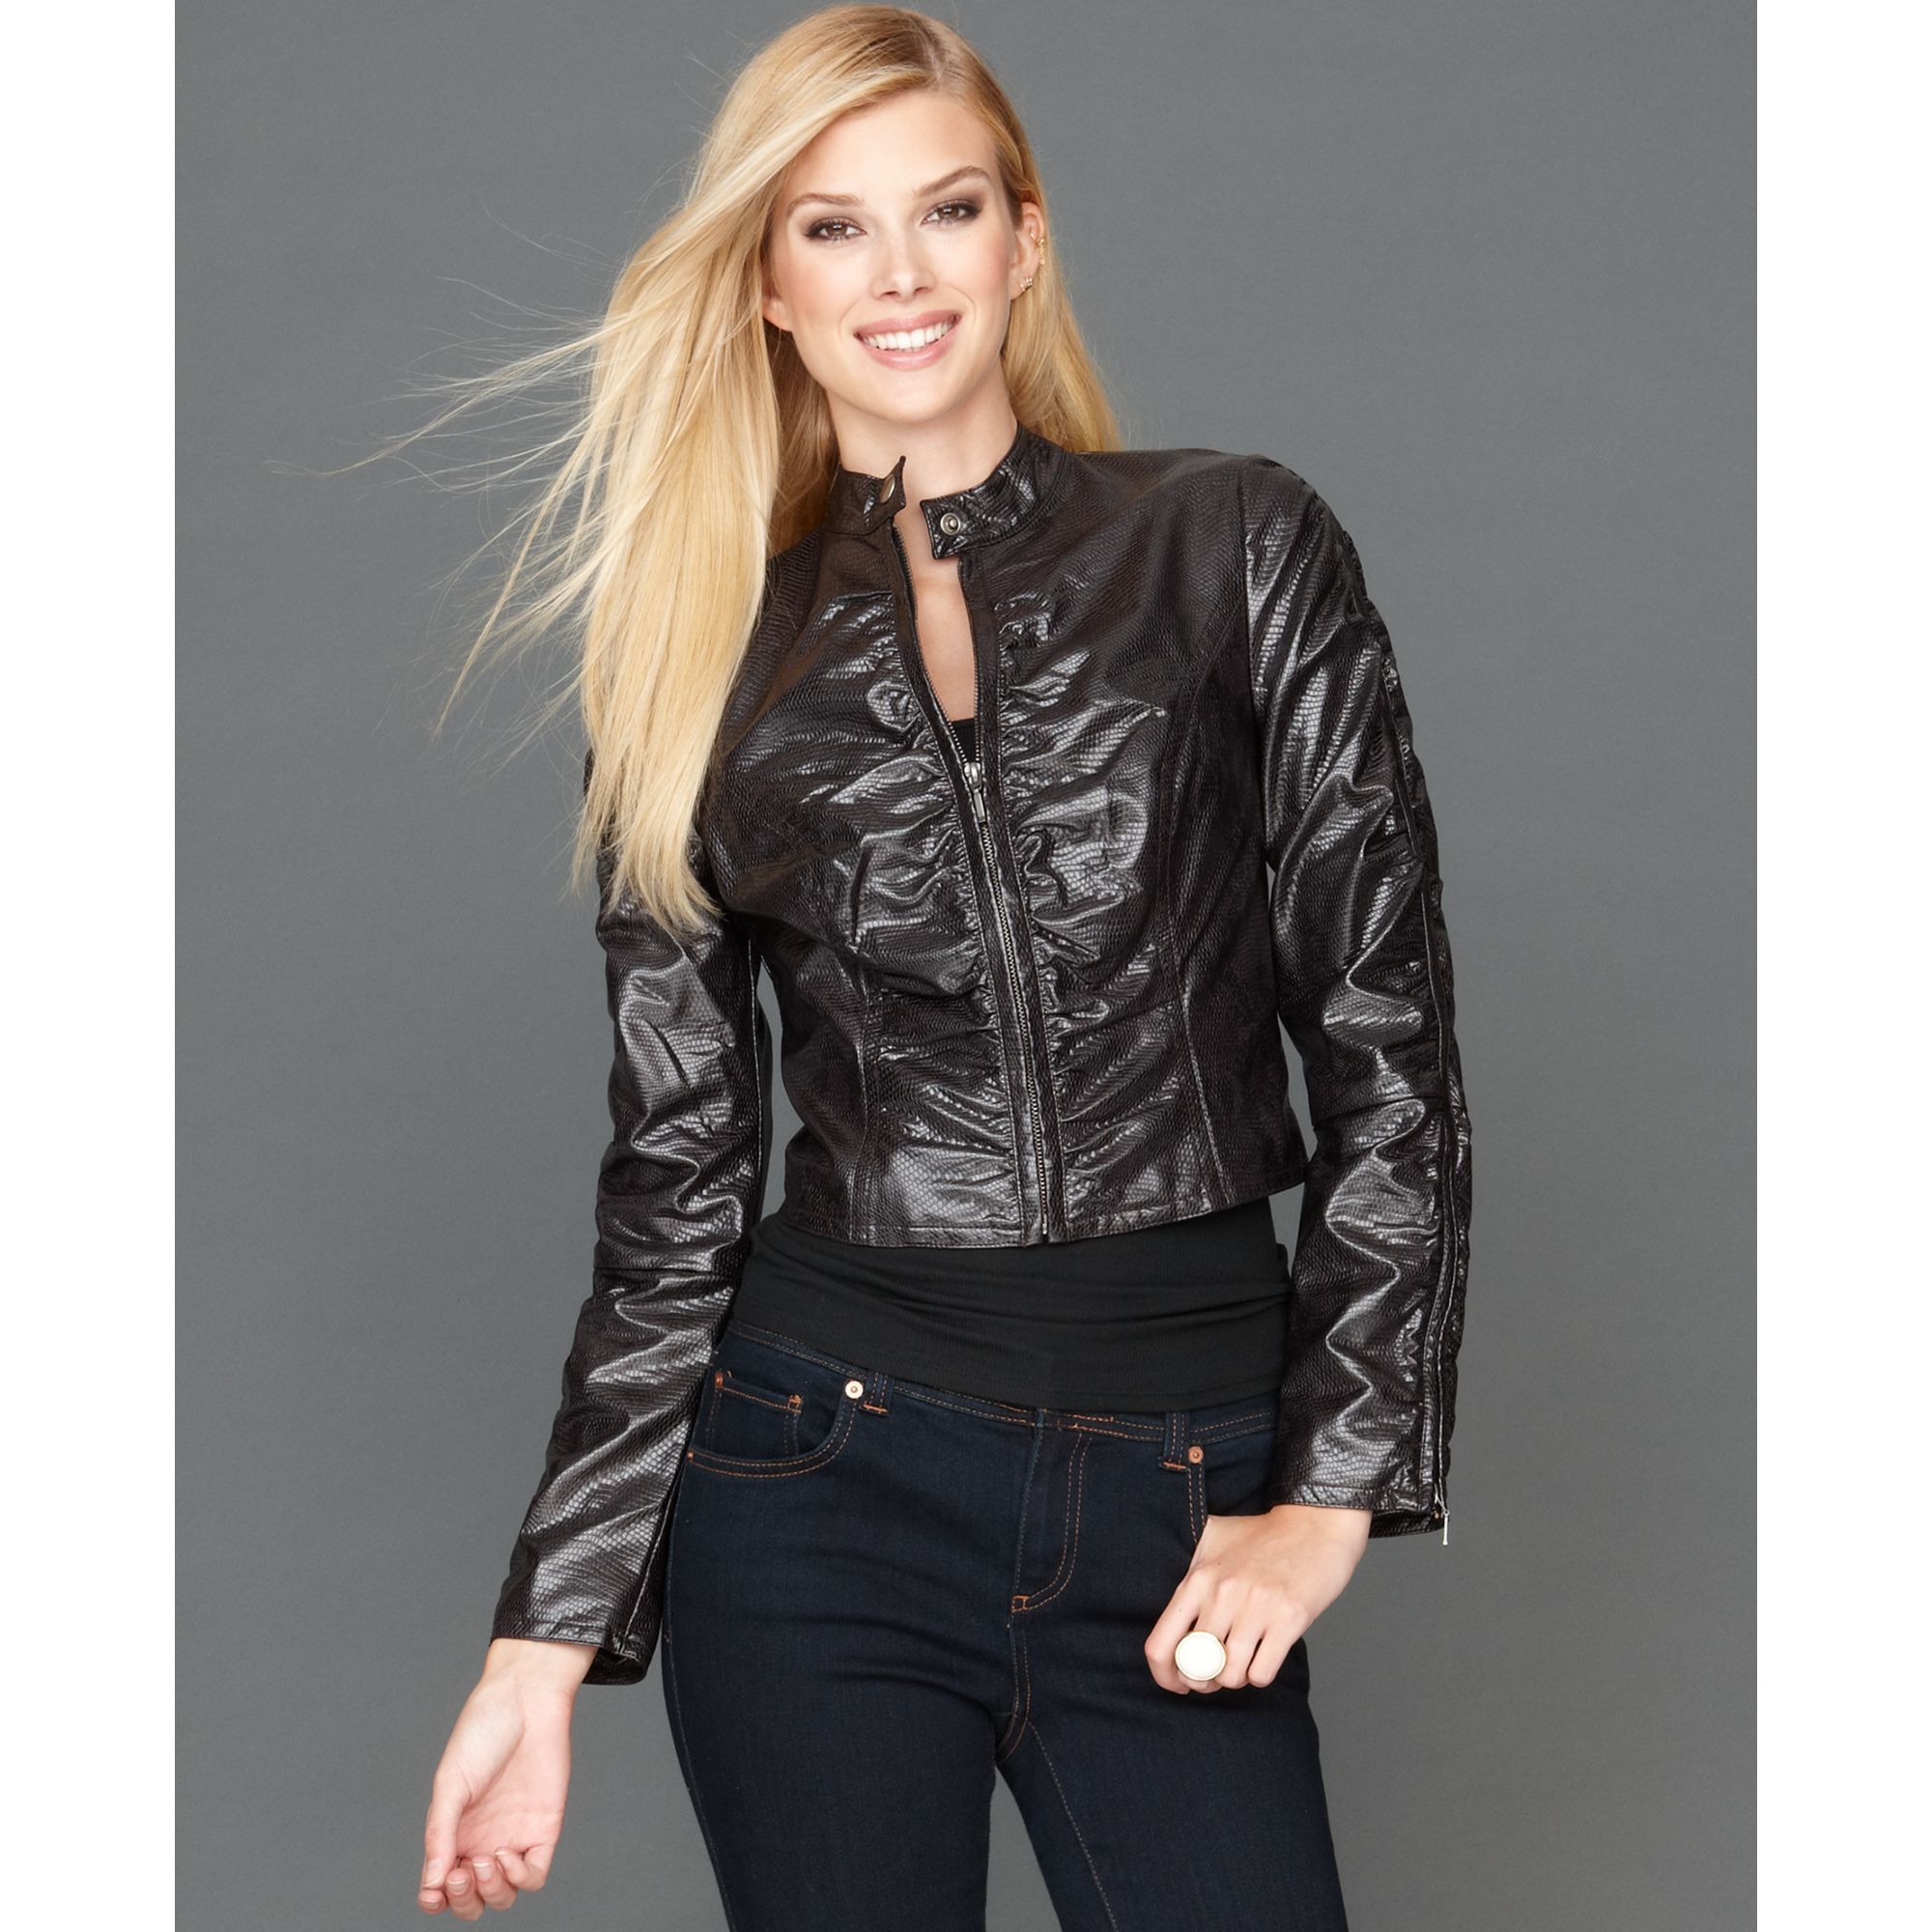 Inc international concepts Stamped Faux Leather Ruched Moto Jacket in ...